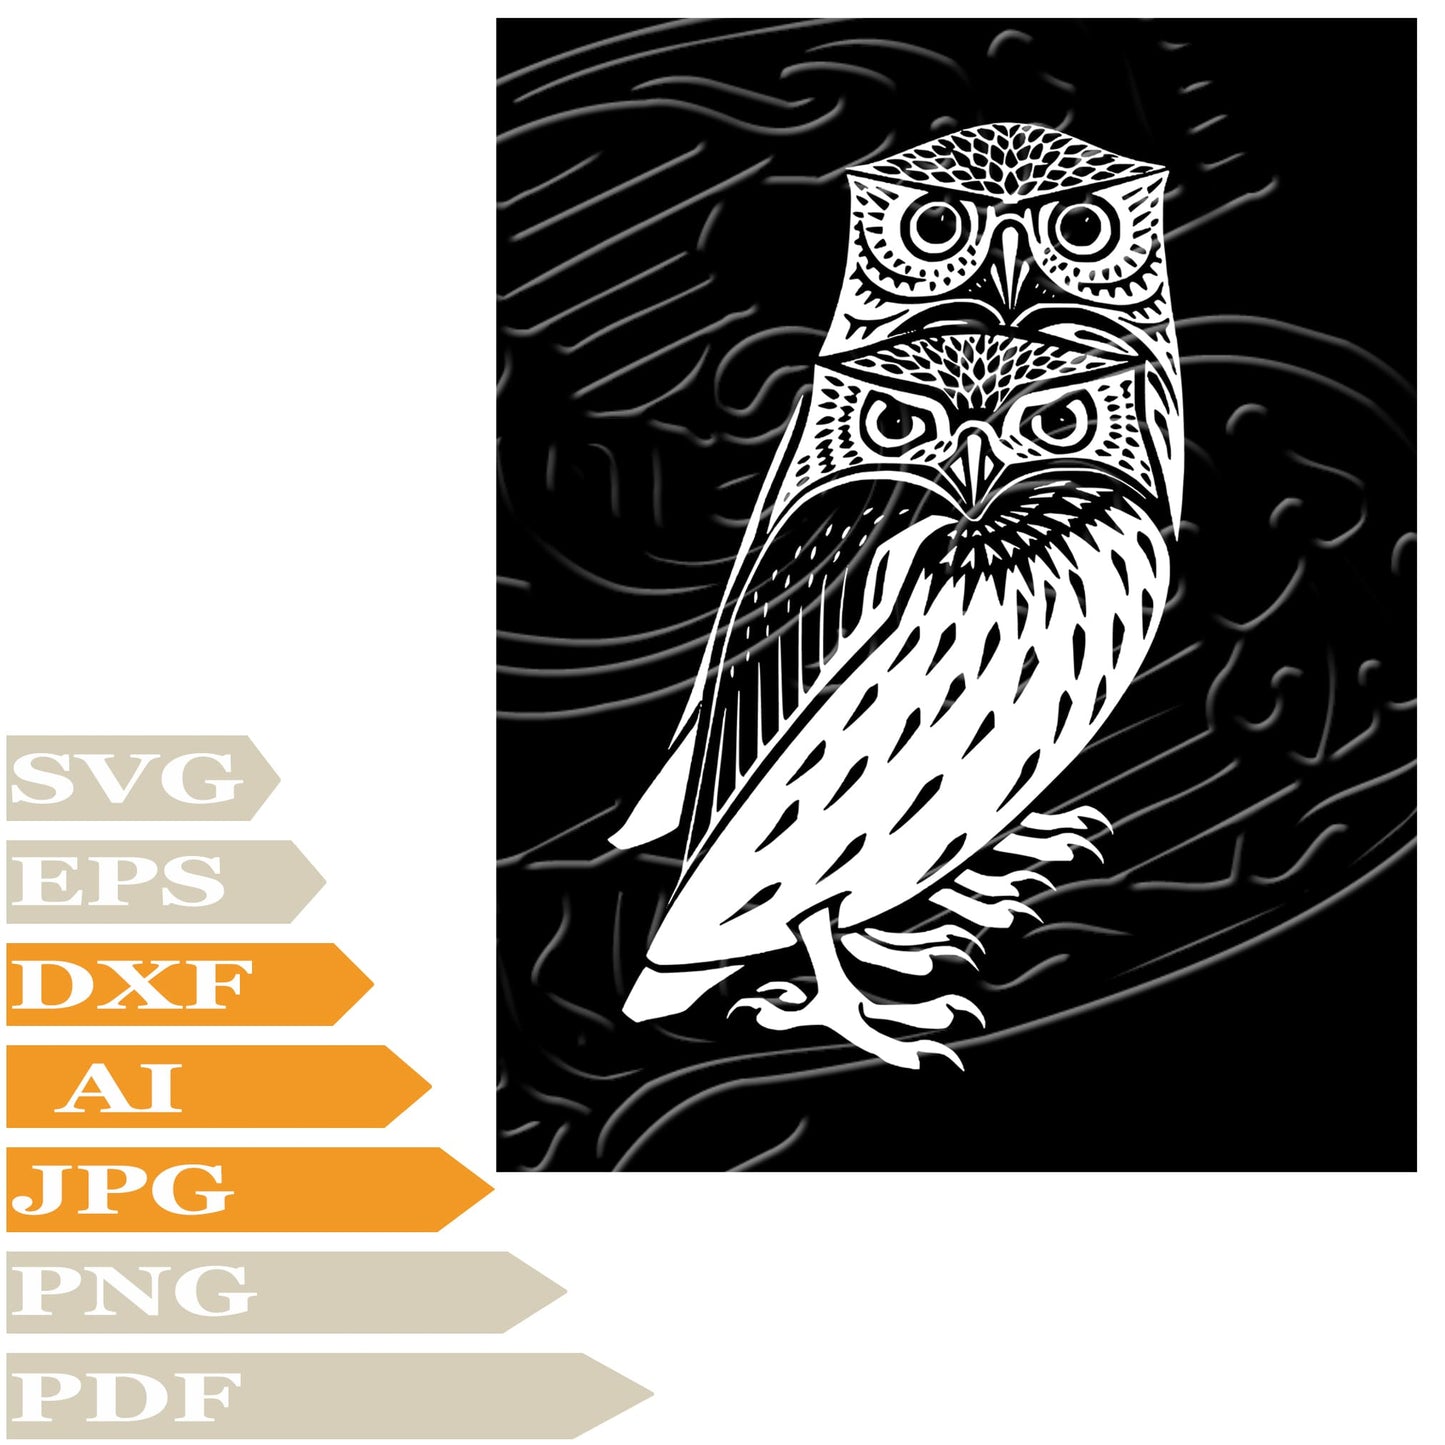 Owl, Owls Svg File, Image Cut, Png, For Tattoo, Silhouette, Digital Vector Download, Cut File, Clipart, For Cricut